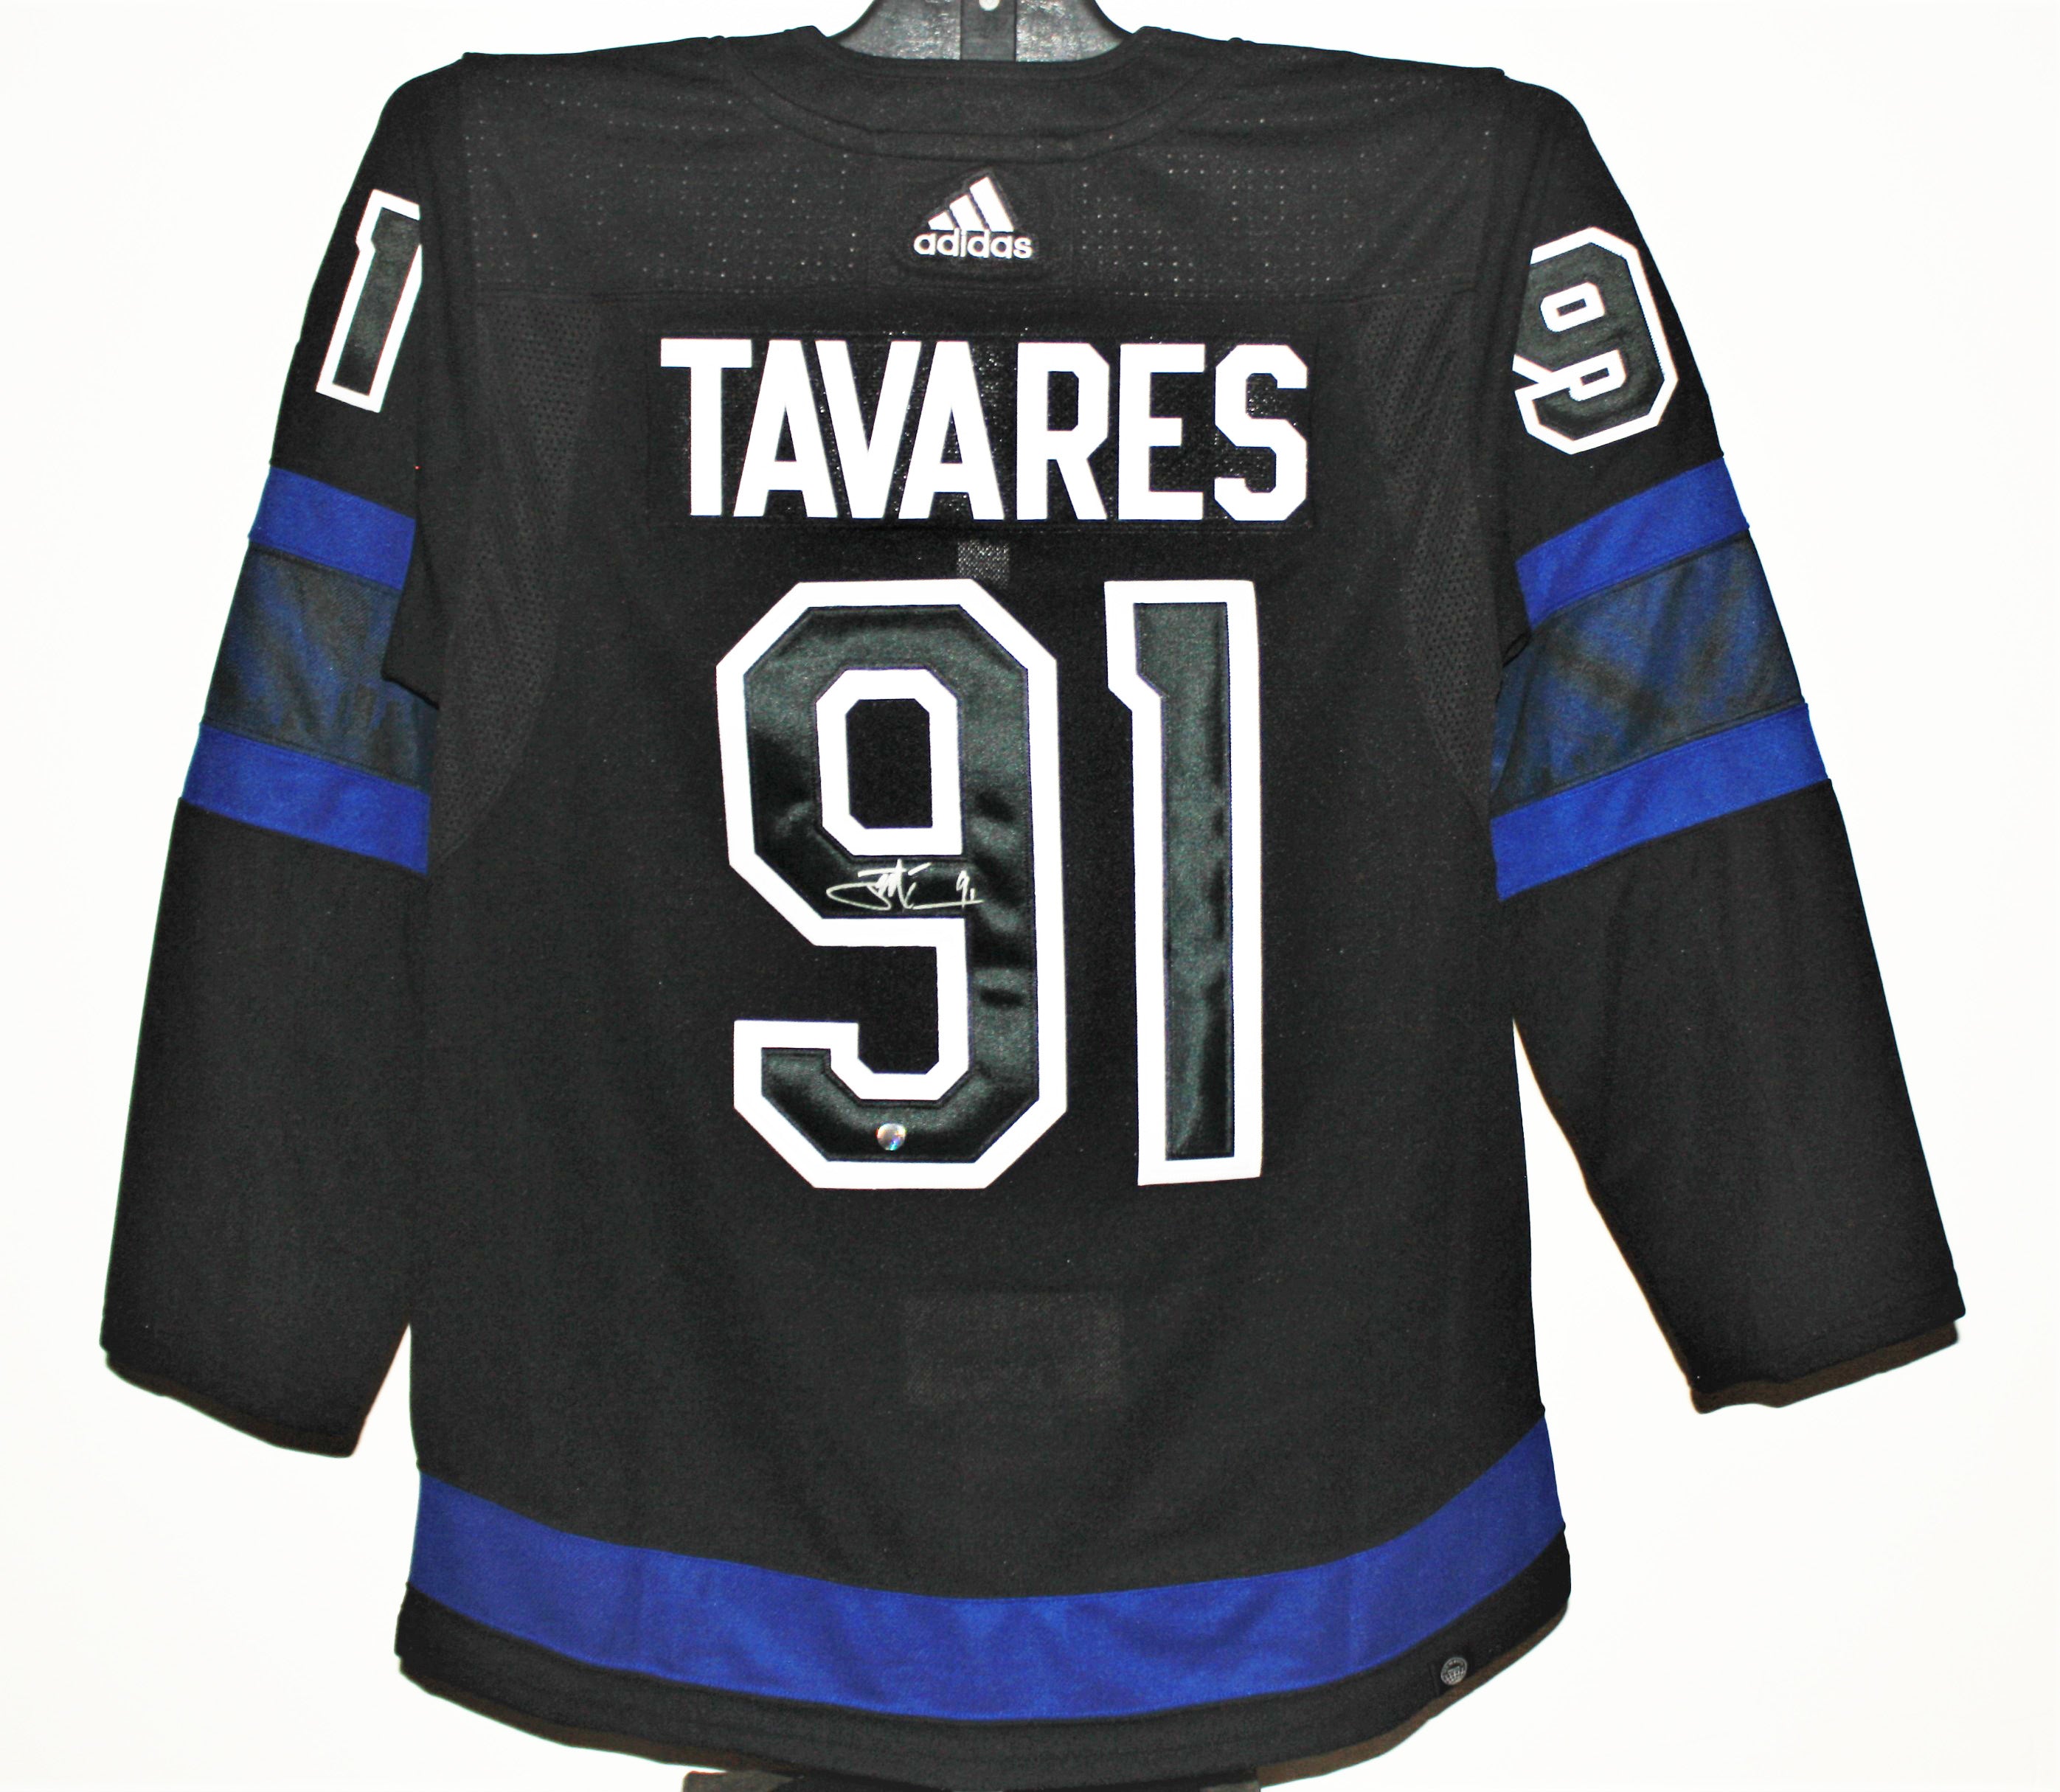 John Tavares Authentic Autographed Jersey & Framed Mini-Stick Package Deal